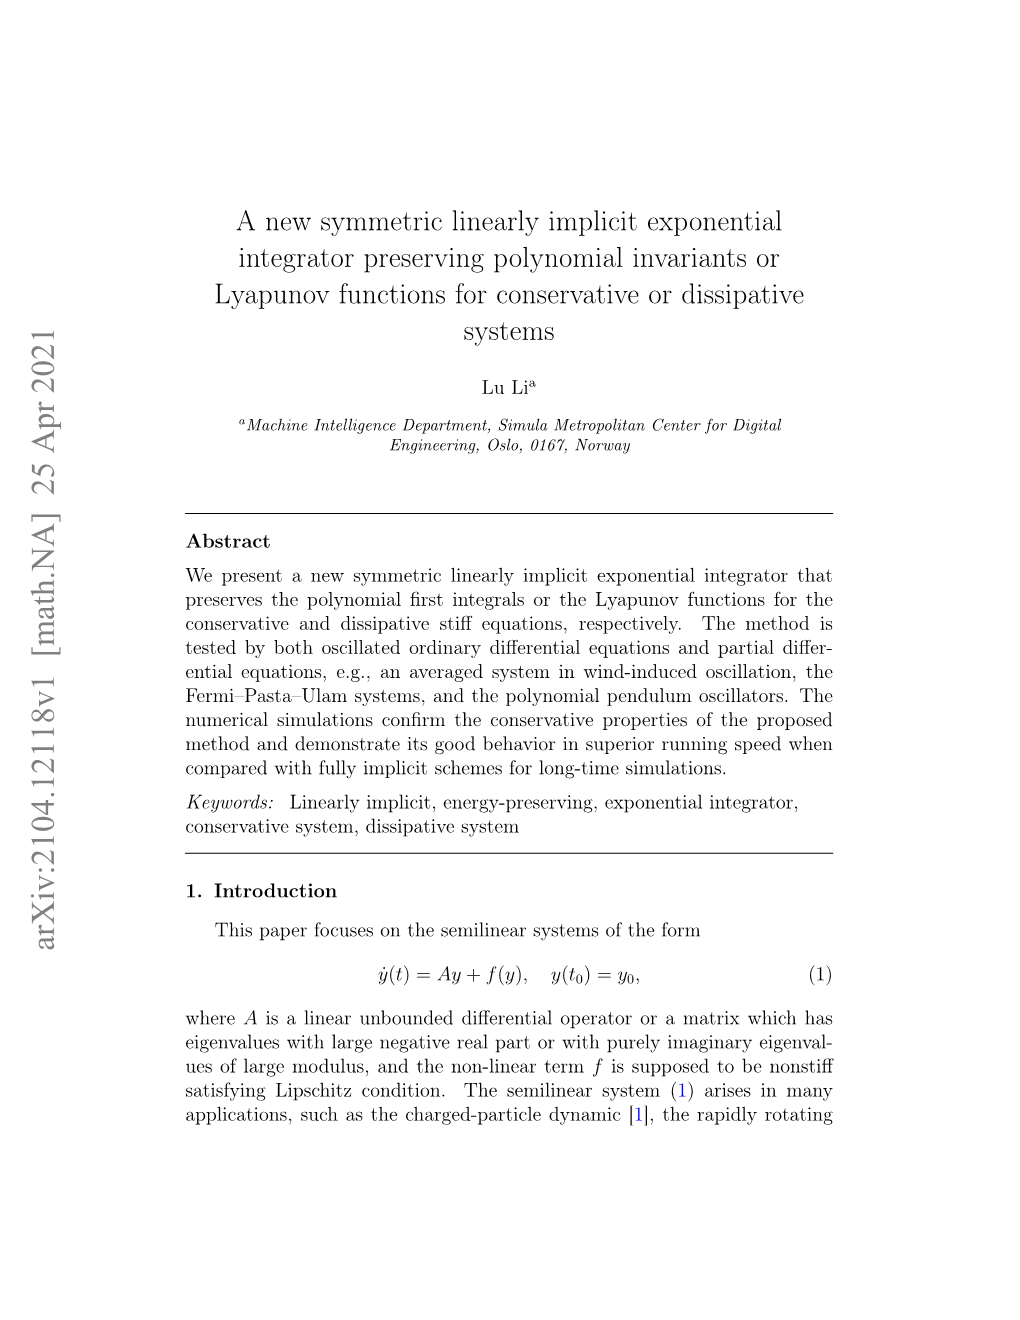 A New Symmetric Linearly Implicit Exponential Integrator Preserving Polynomial Invariants Or Lyapunov Functions for Conservative Or Dissipative Systems